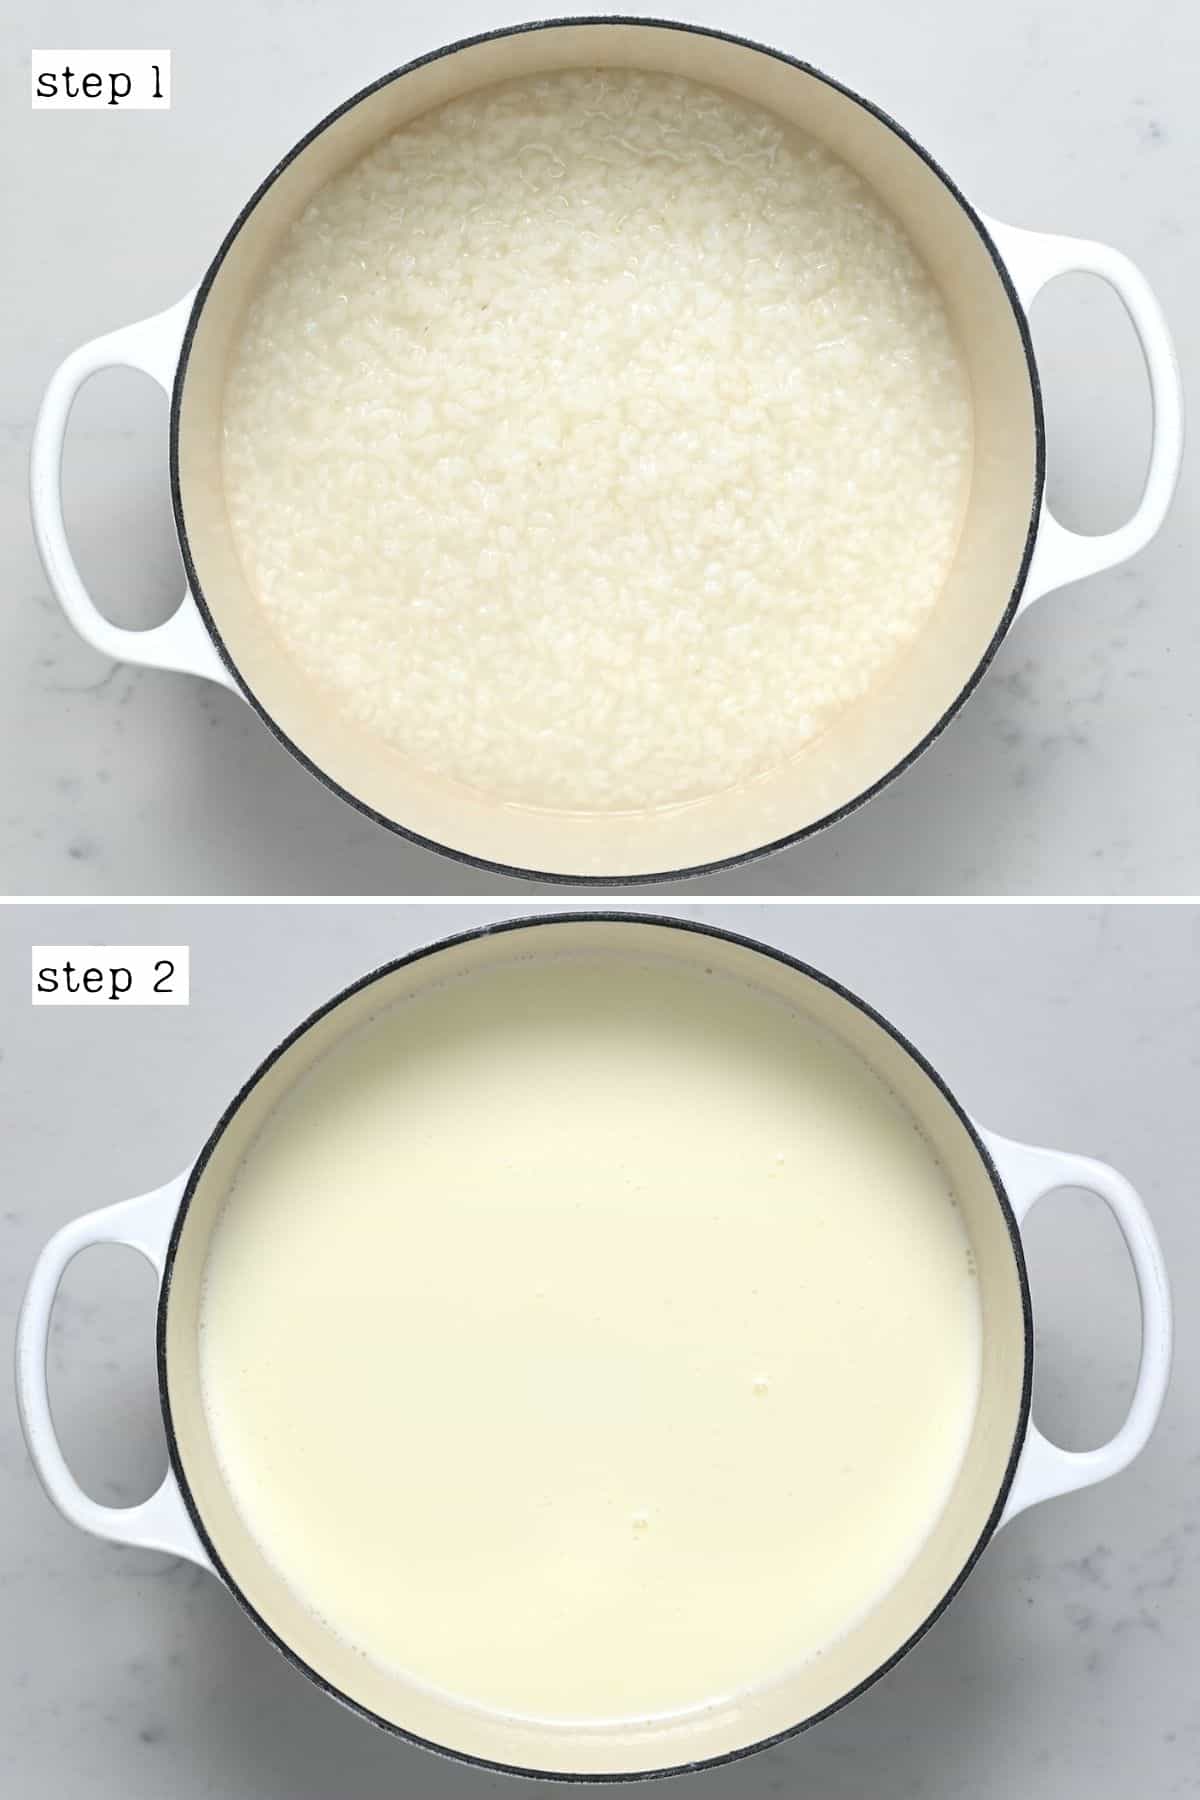 Steps for making rice pudding